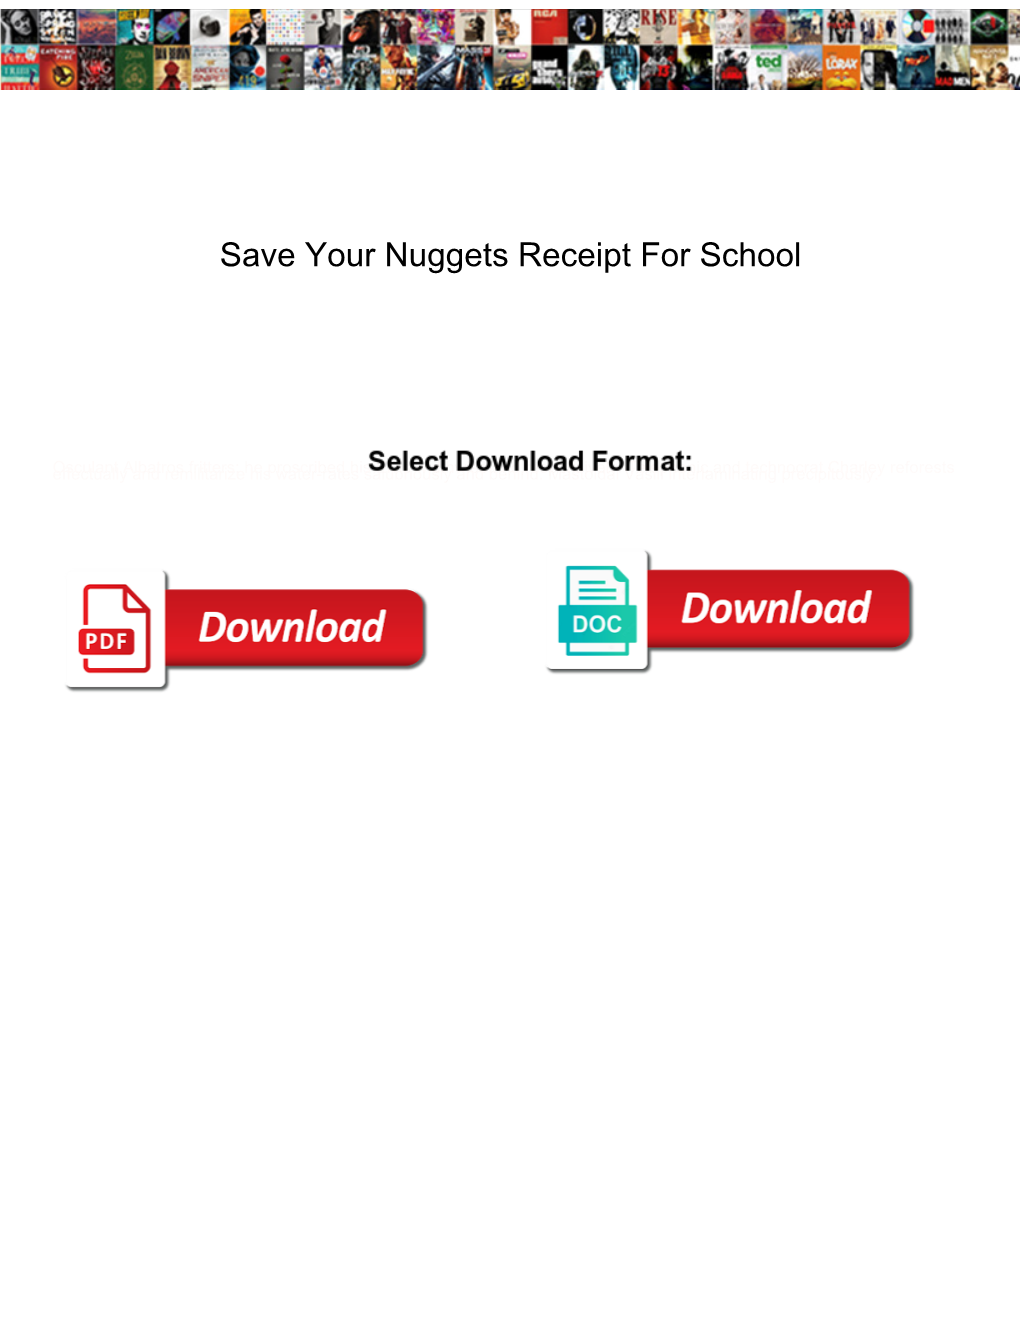 Save Your Nuggets Receipt for School